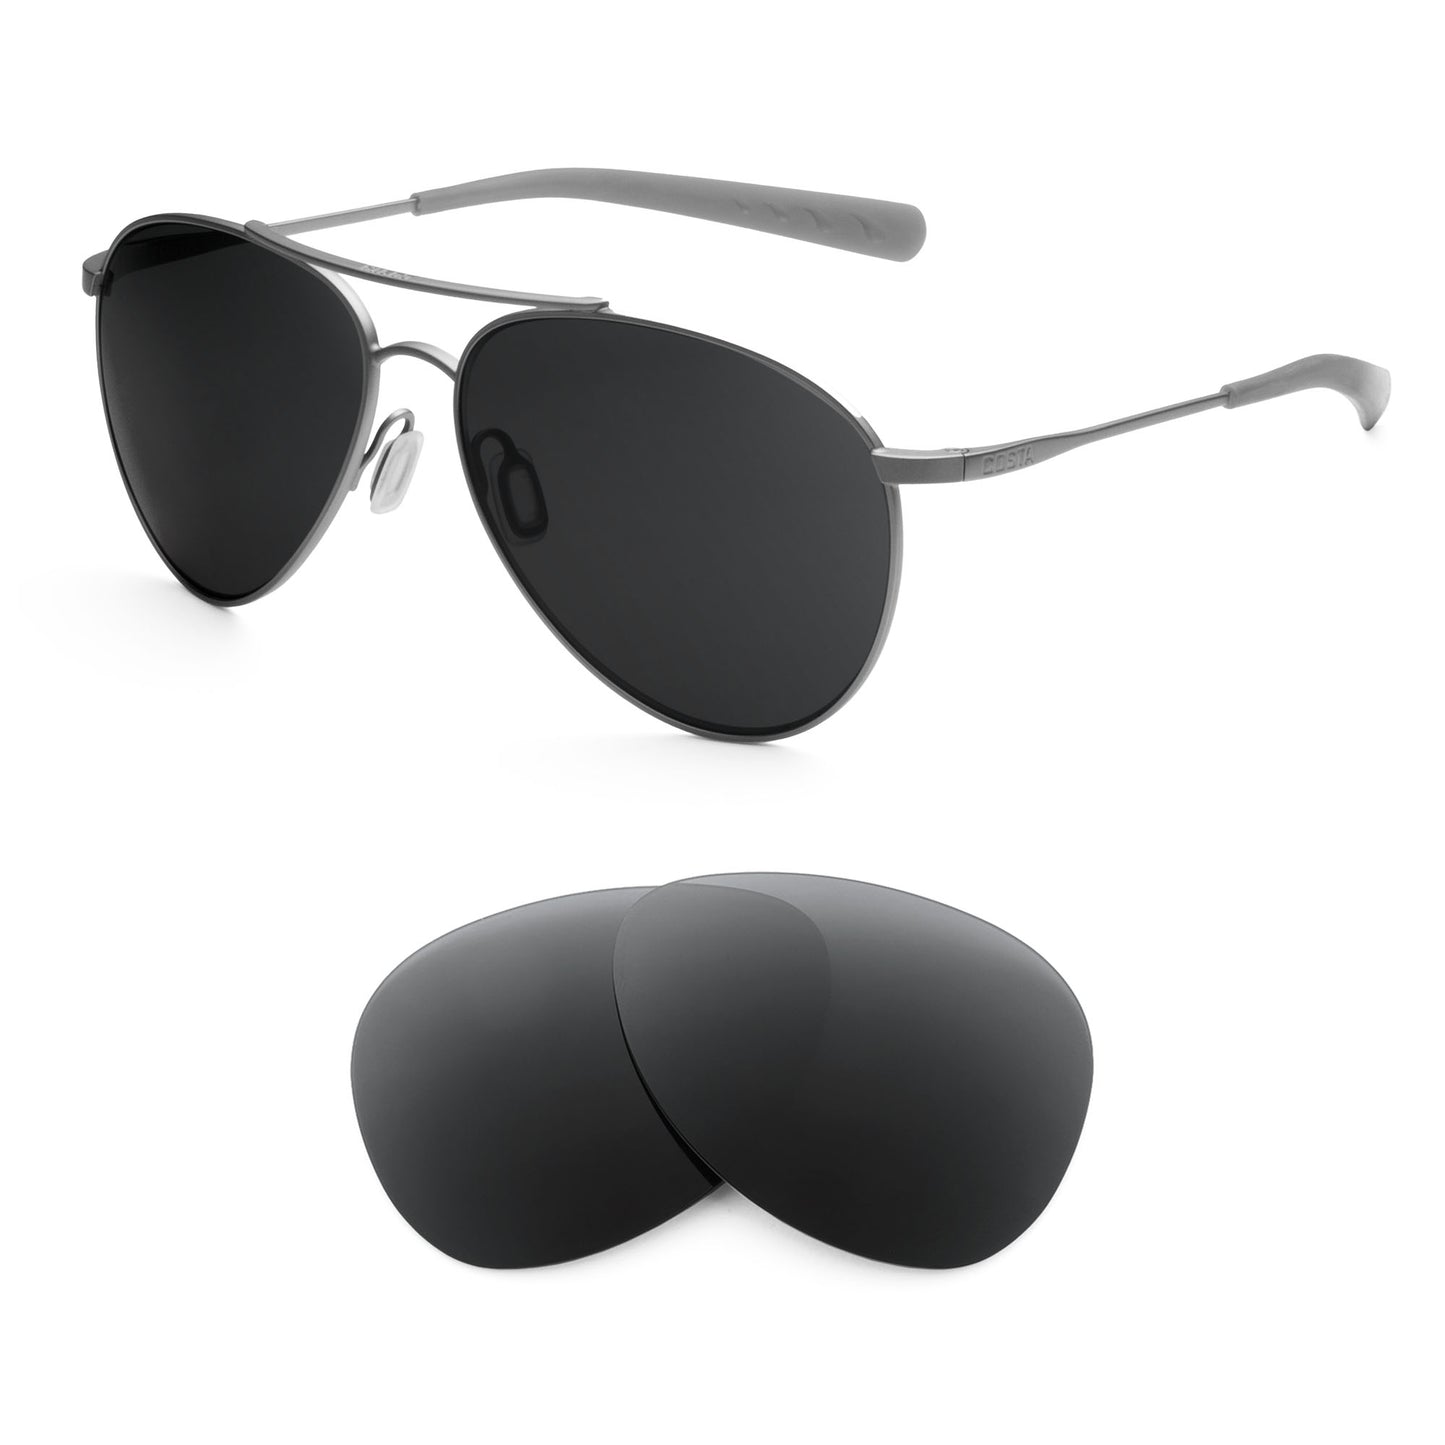 Costa Piper sunglasses with replacement lenses